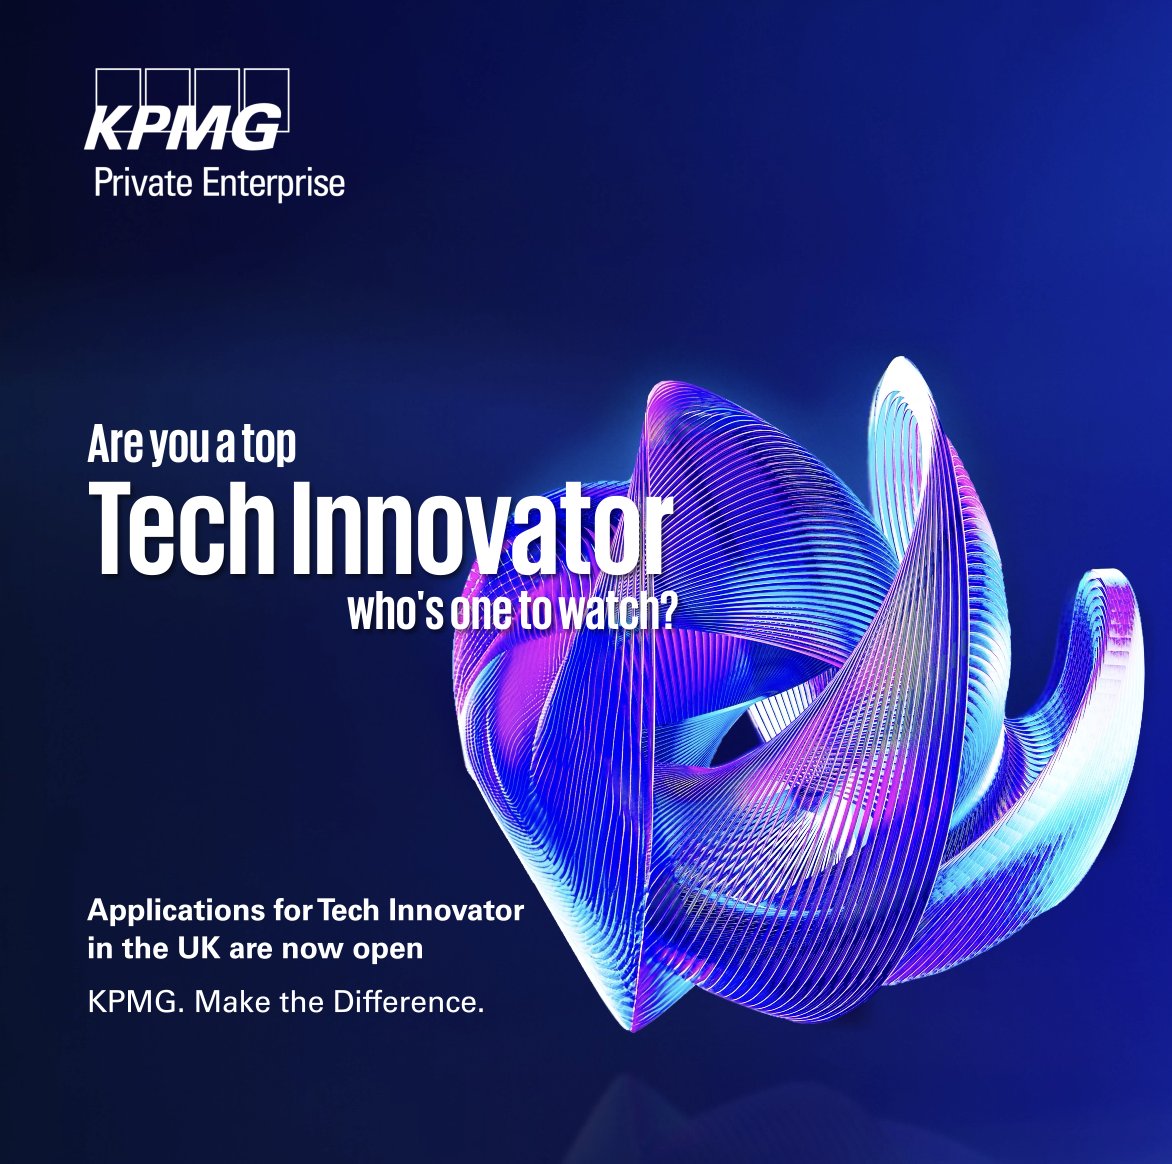 If you are a fast growing scaleup business from early stage to accelerated growth, @KPMG invites you to pitch your innovations and present your growth ambitions to regional, national and global industry experts.
Apply here👉hubs.ly/Q02vF_N00
#KPMGTech #ScaleUps